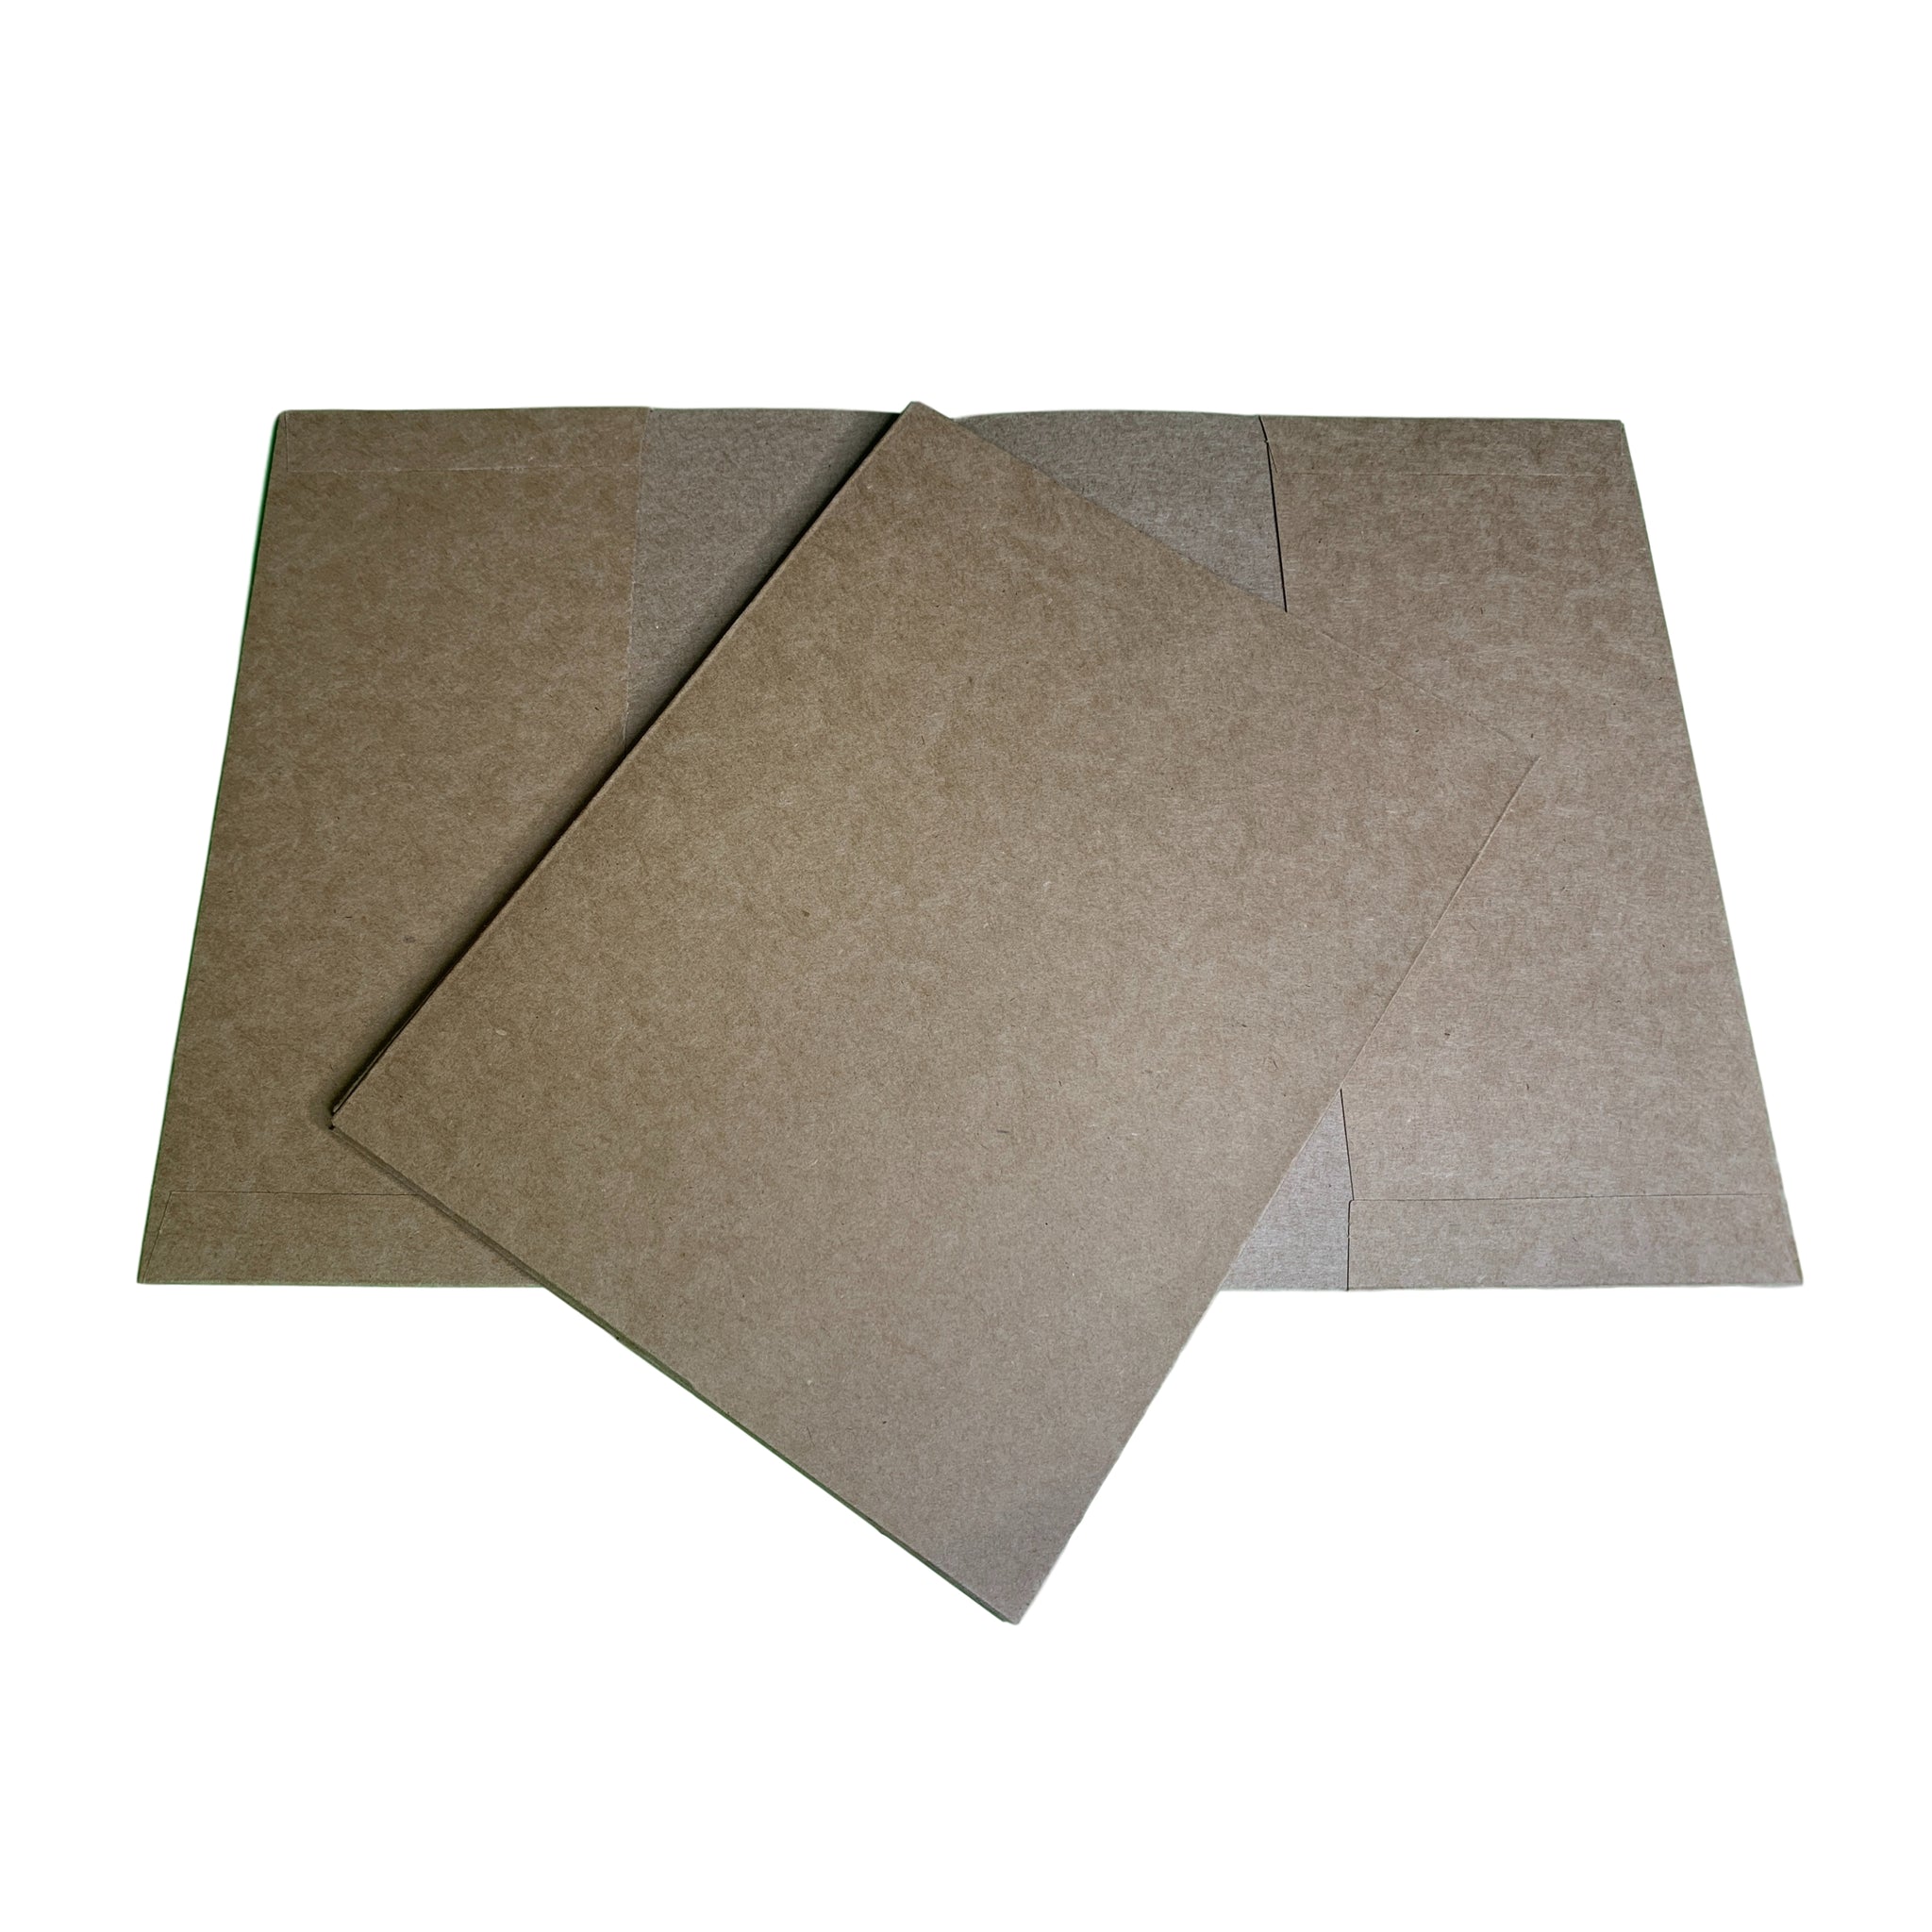 Pack of 5 9x7" Kraft Paper Exercise Book Covers by Janrax